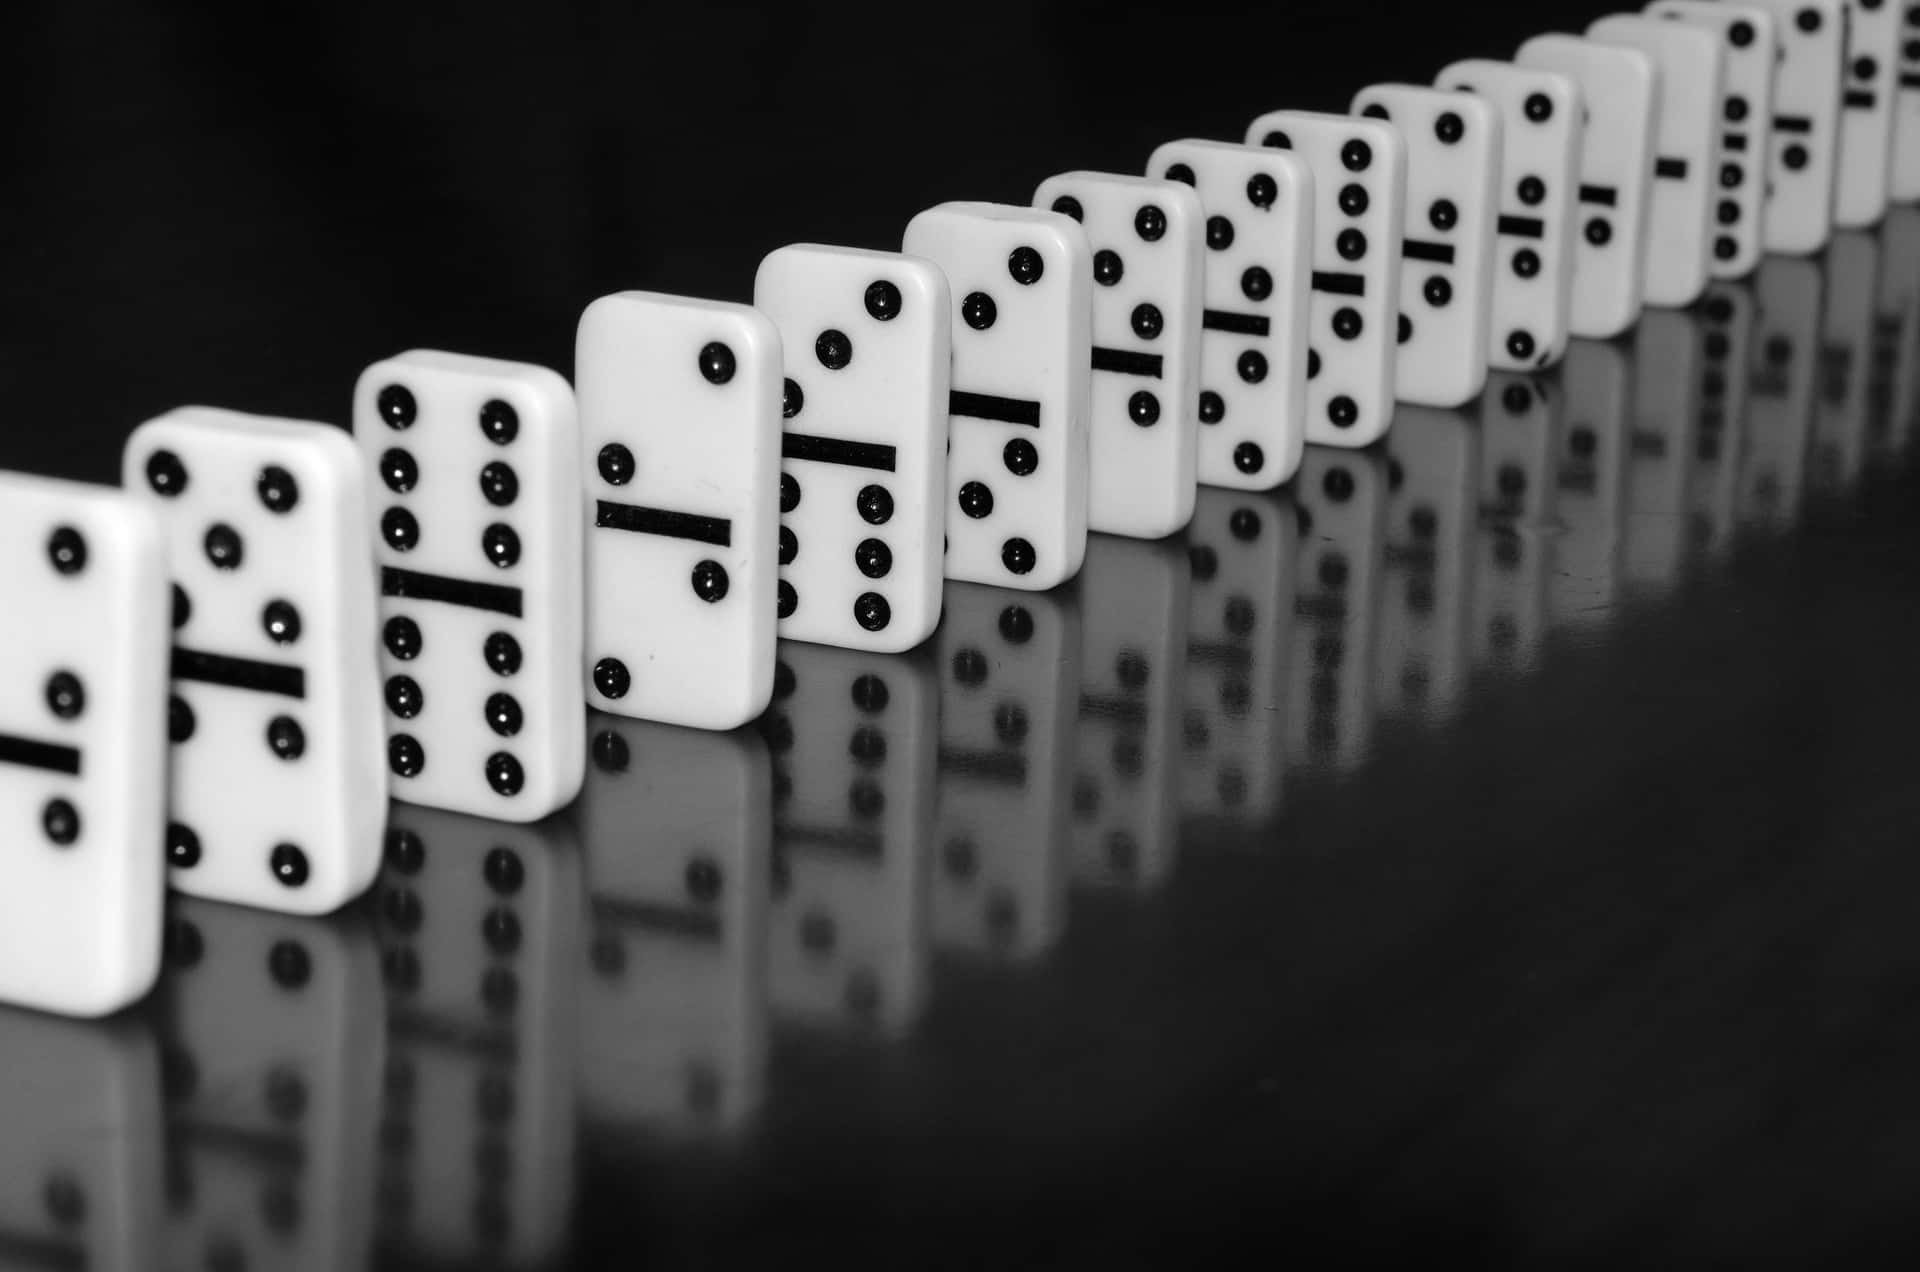 Domino abstract background with black and white pieces